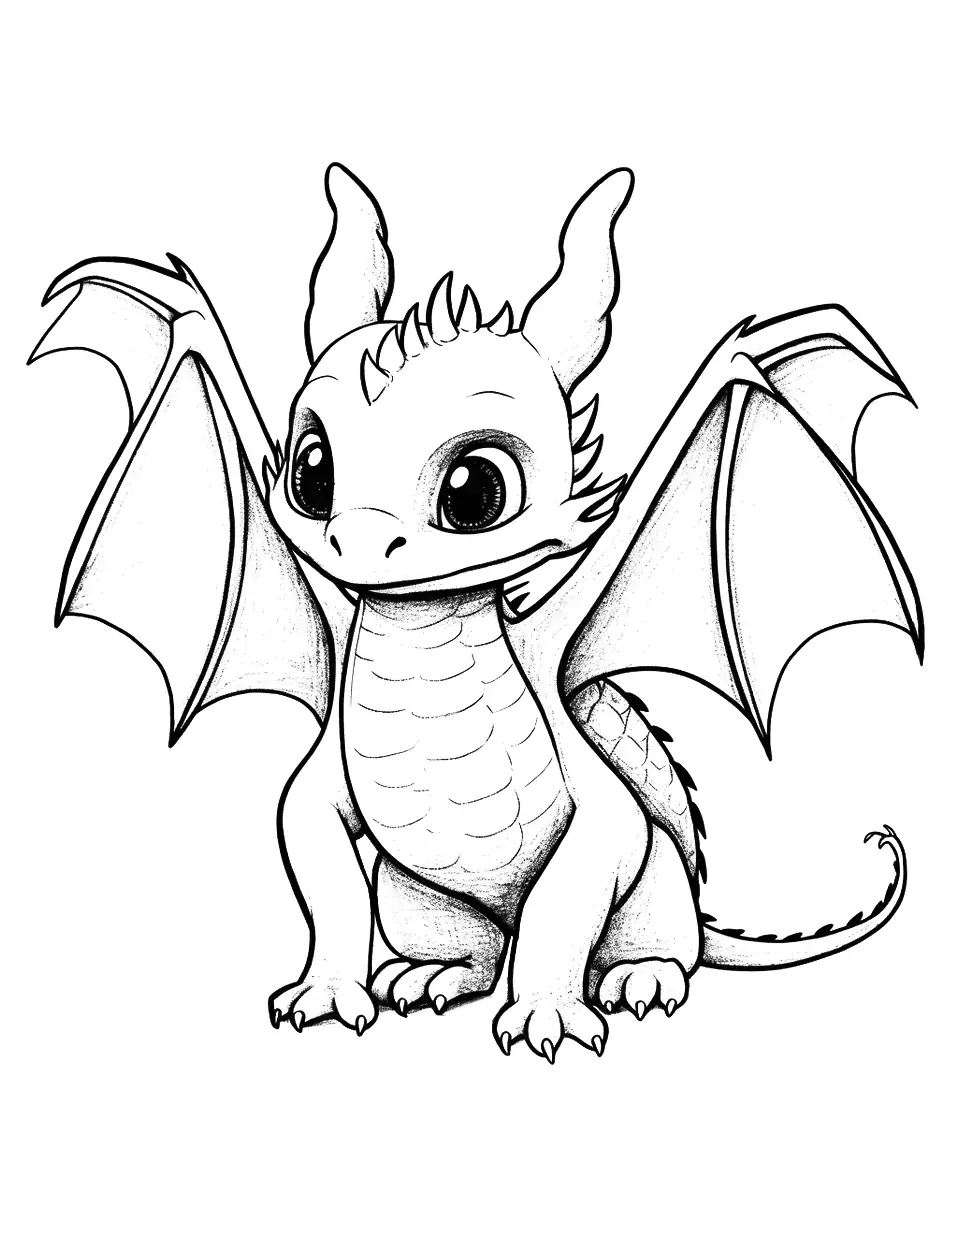 Baby Night Fury Dragon Coloring Page - A baby Night Fury, ready to learn how to fly.